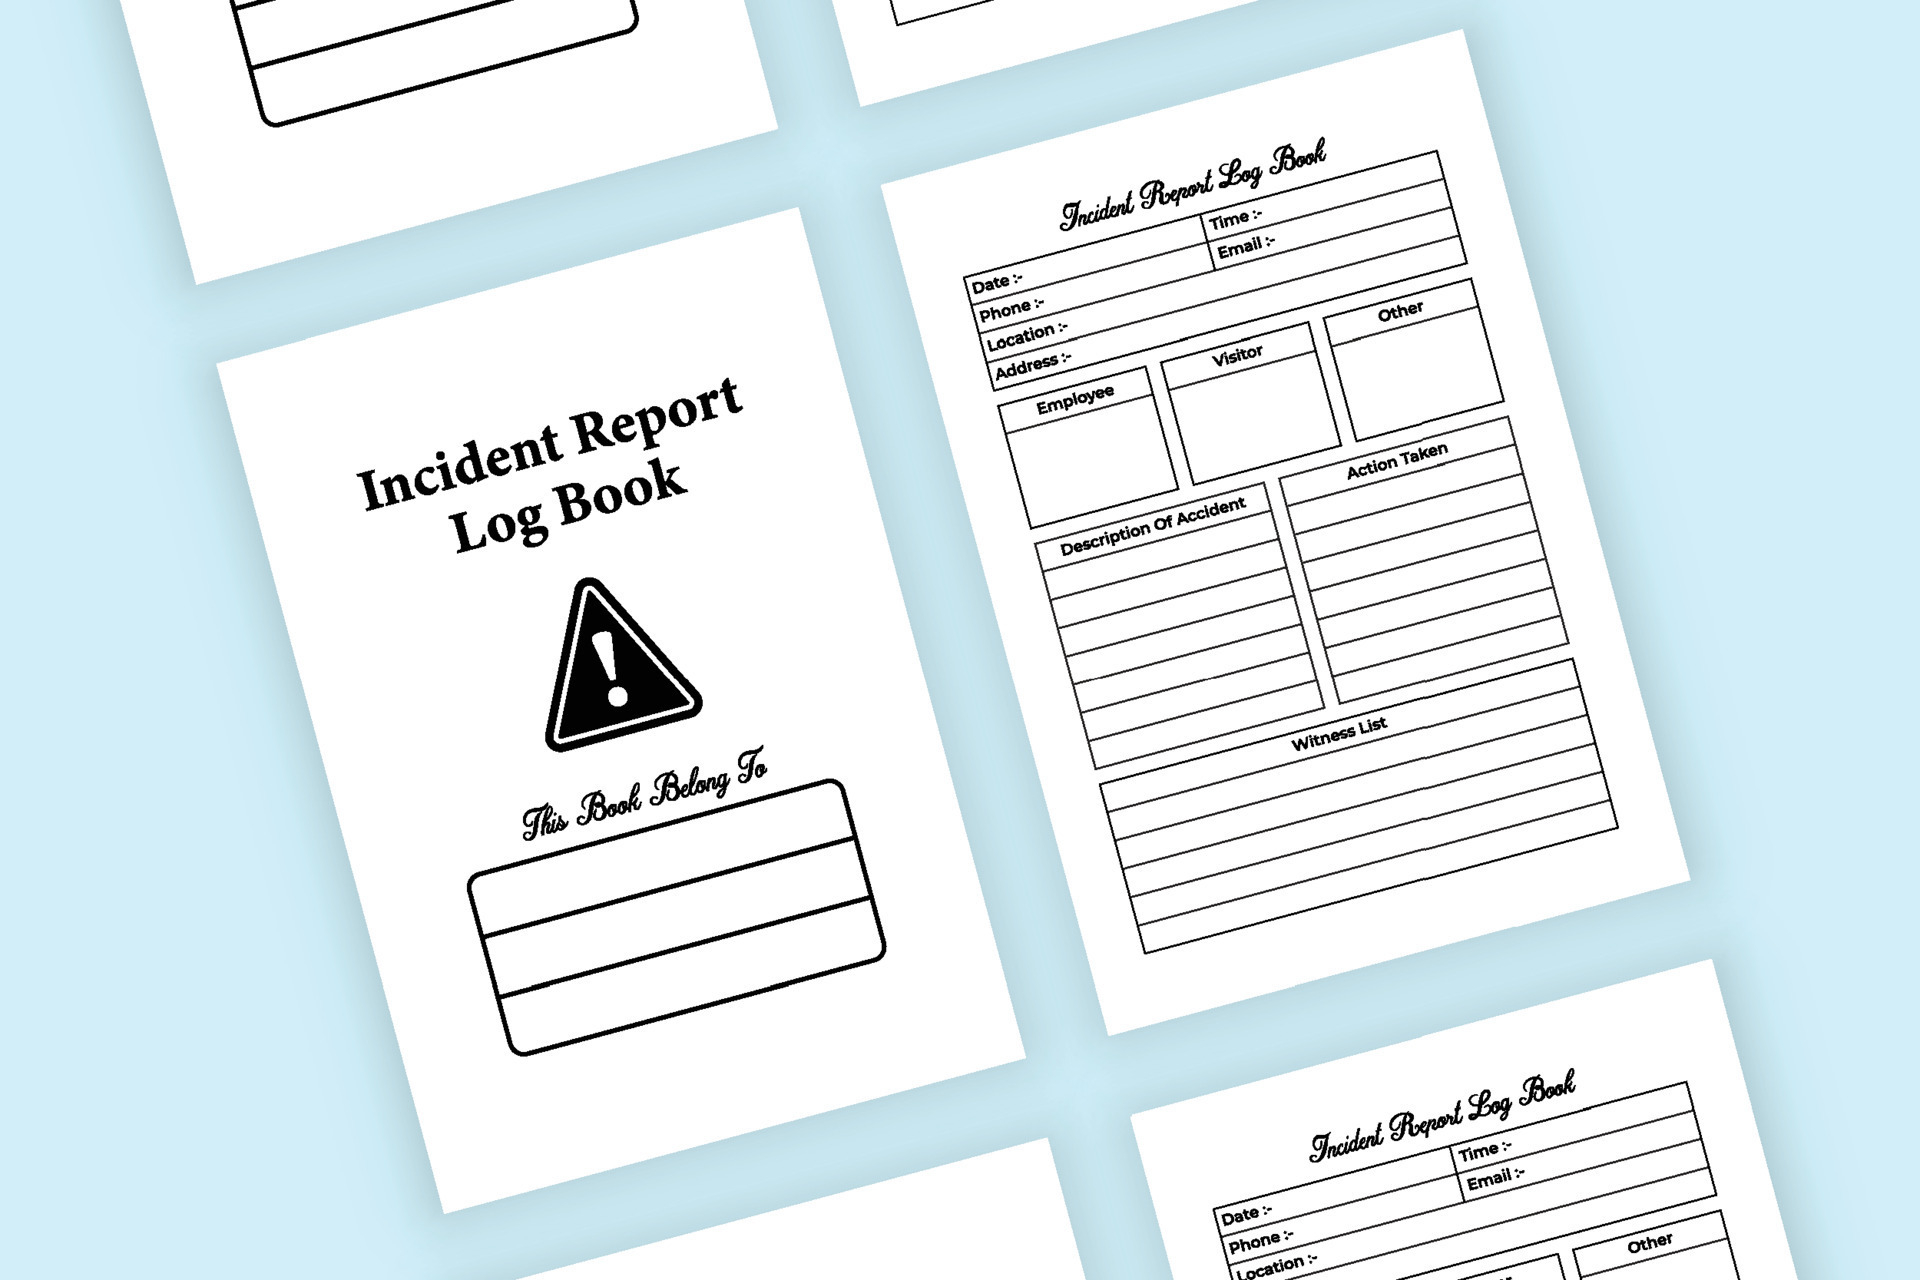 Incident report log book interior. Official or business incident